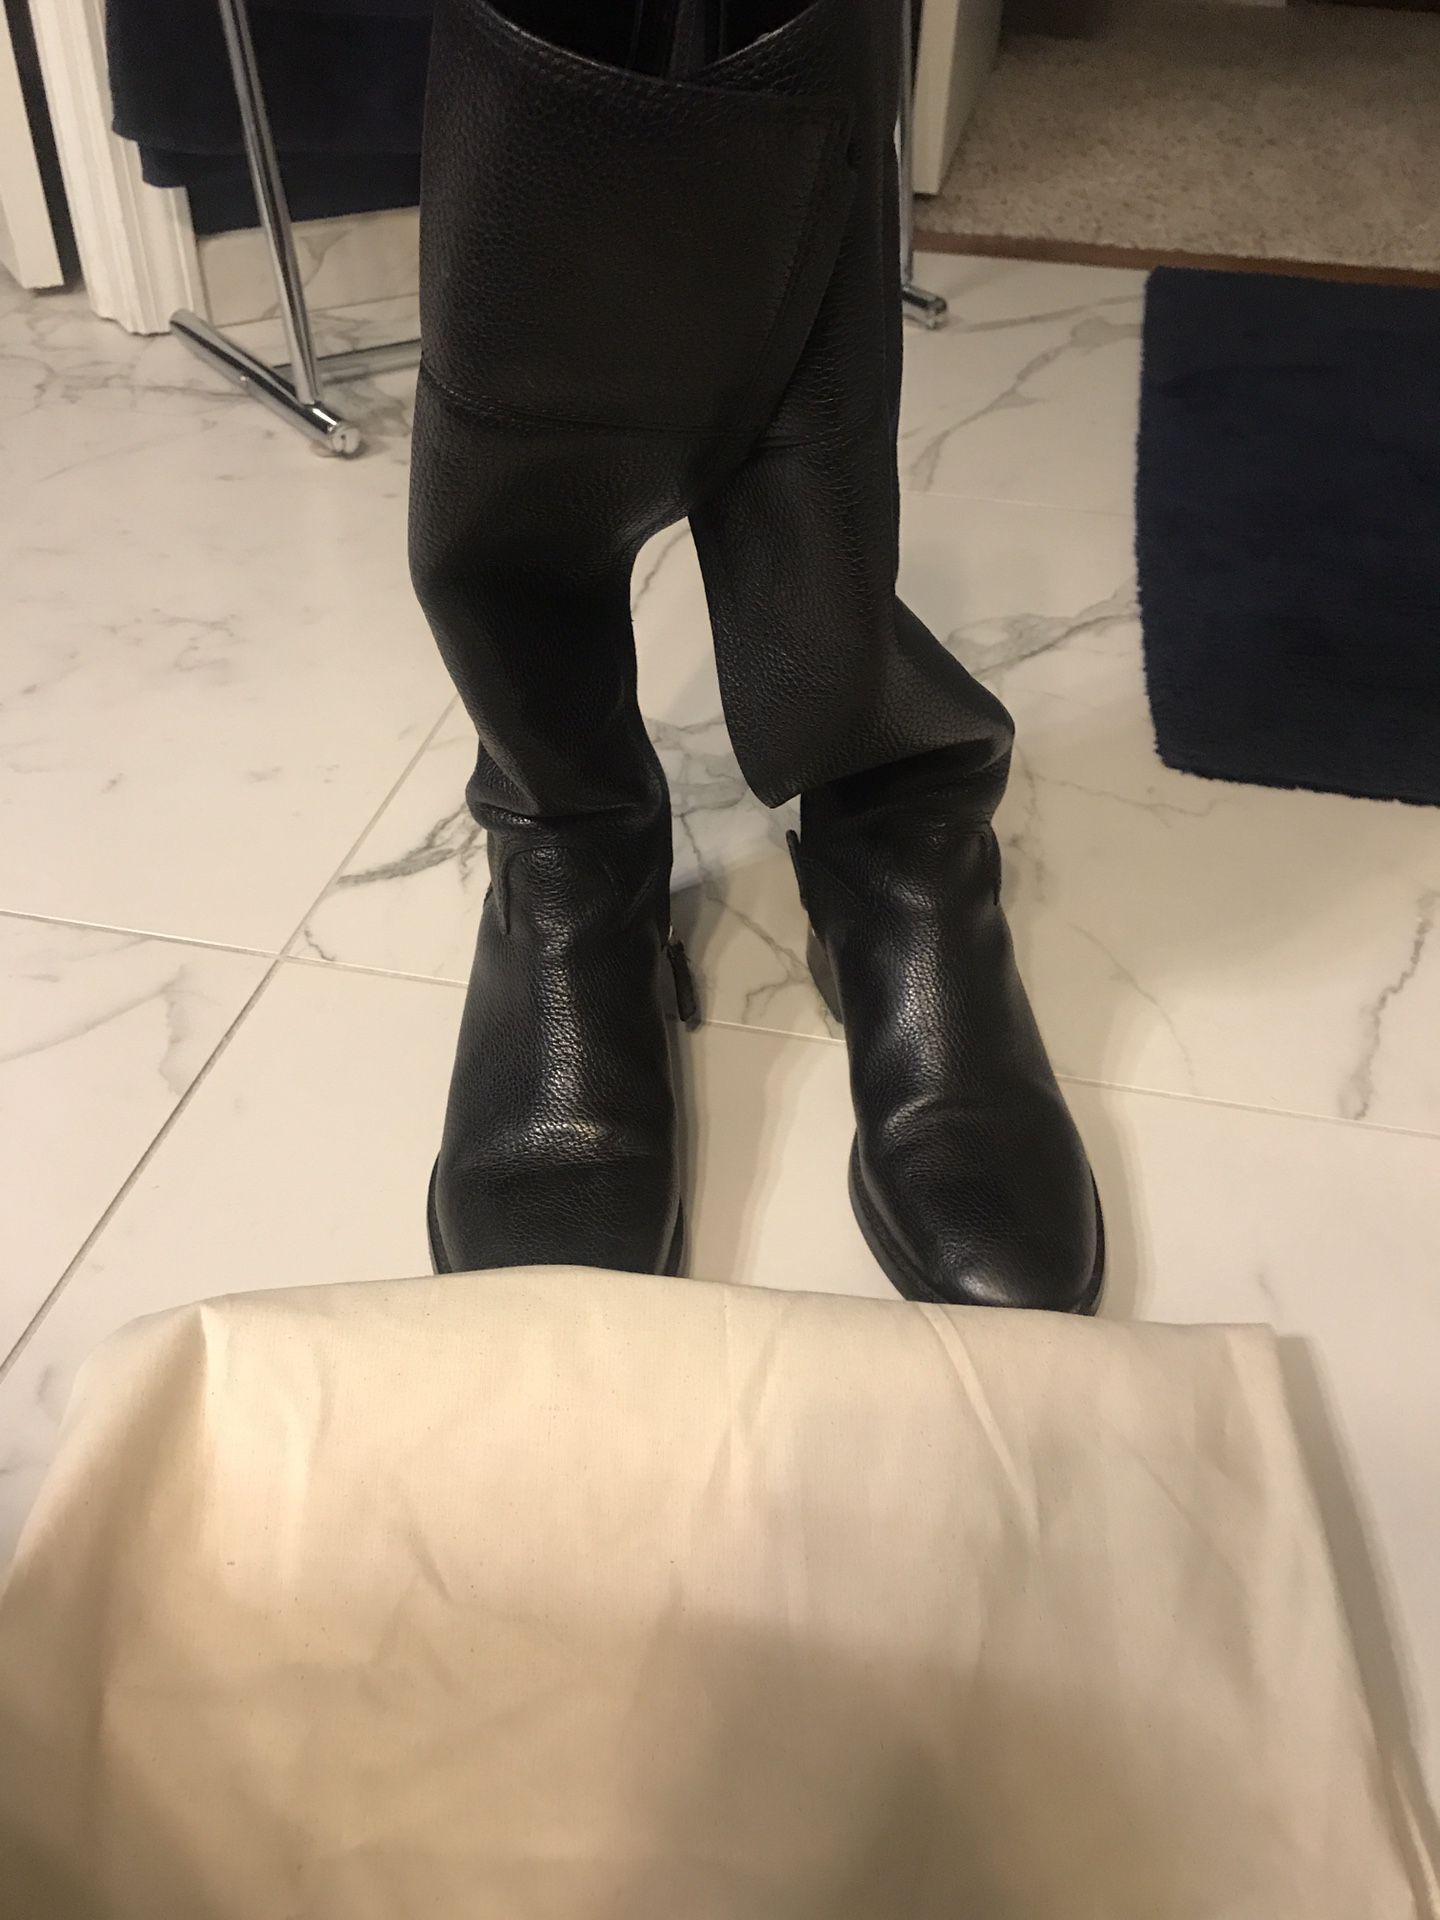 Tory Burch black leather knee boots, size 8